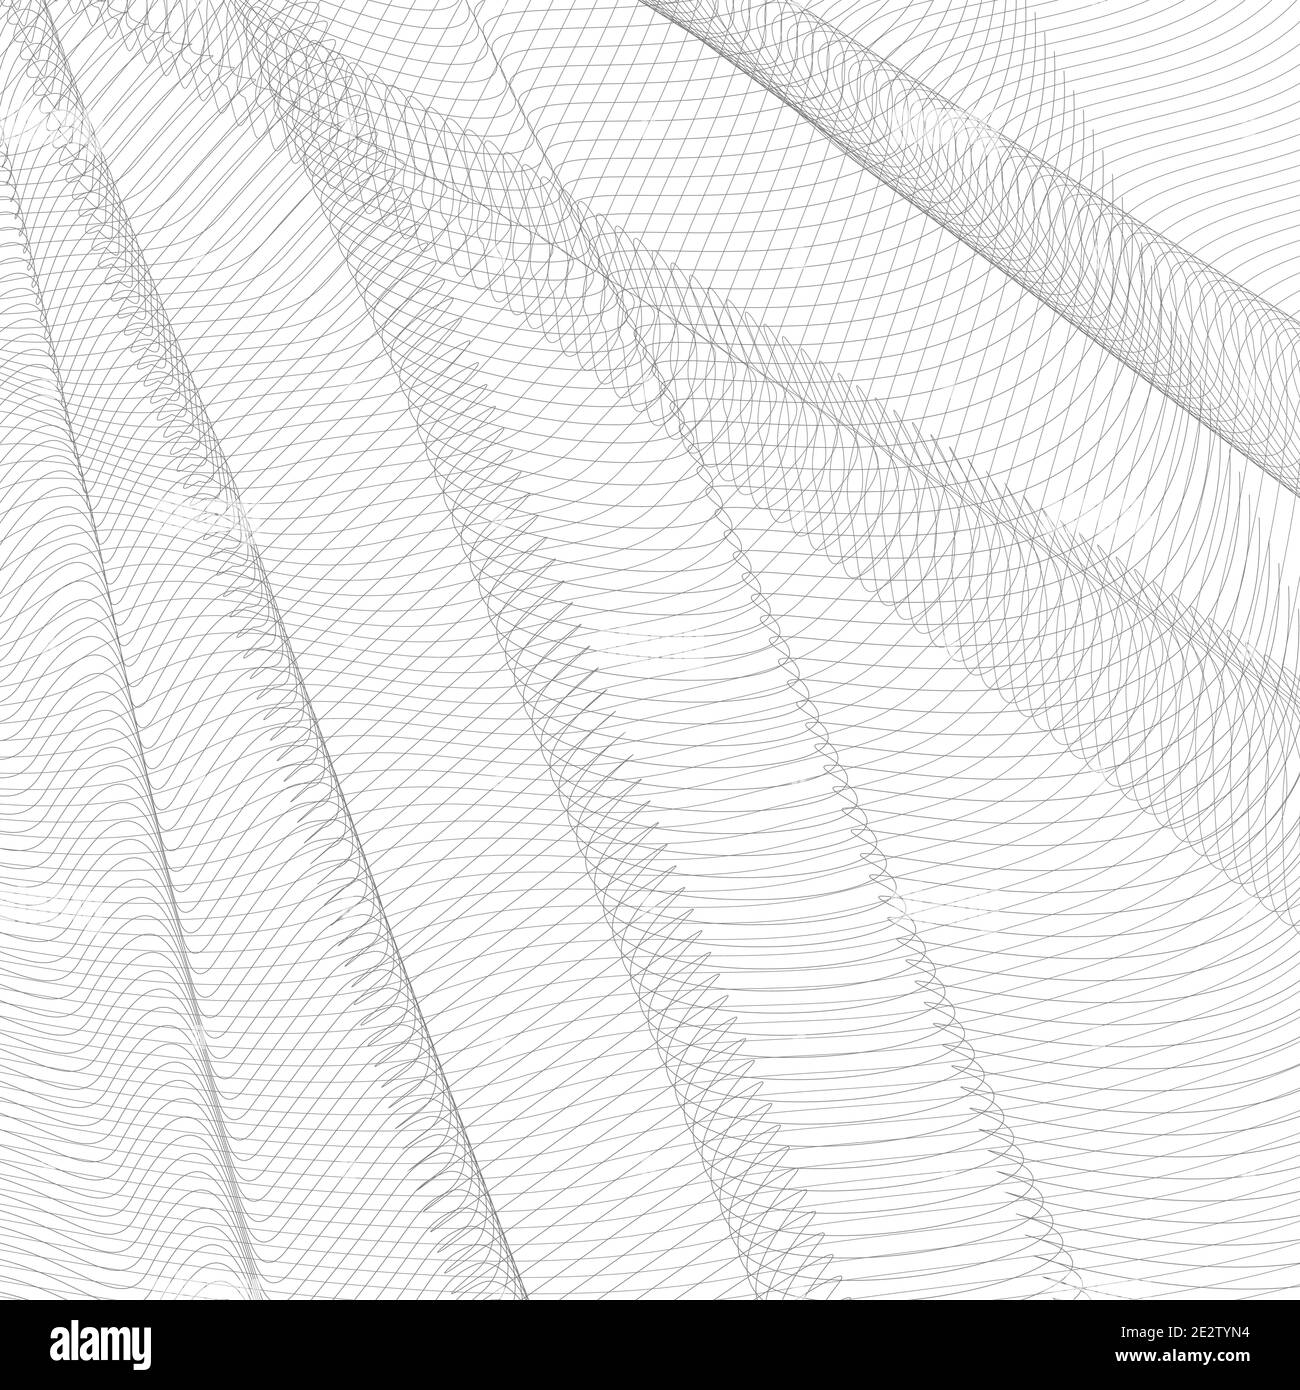 Abstract creased network. Gray undulating subtle curves. Vector monochrome striped background. Line art pattern, textile, net, mesh texture. EPS10 Stock Vector